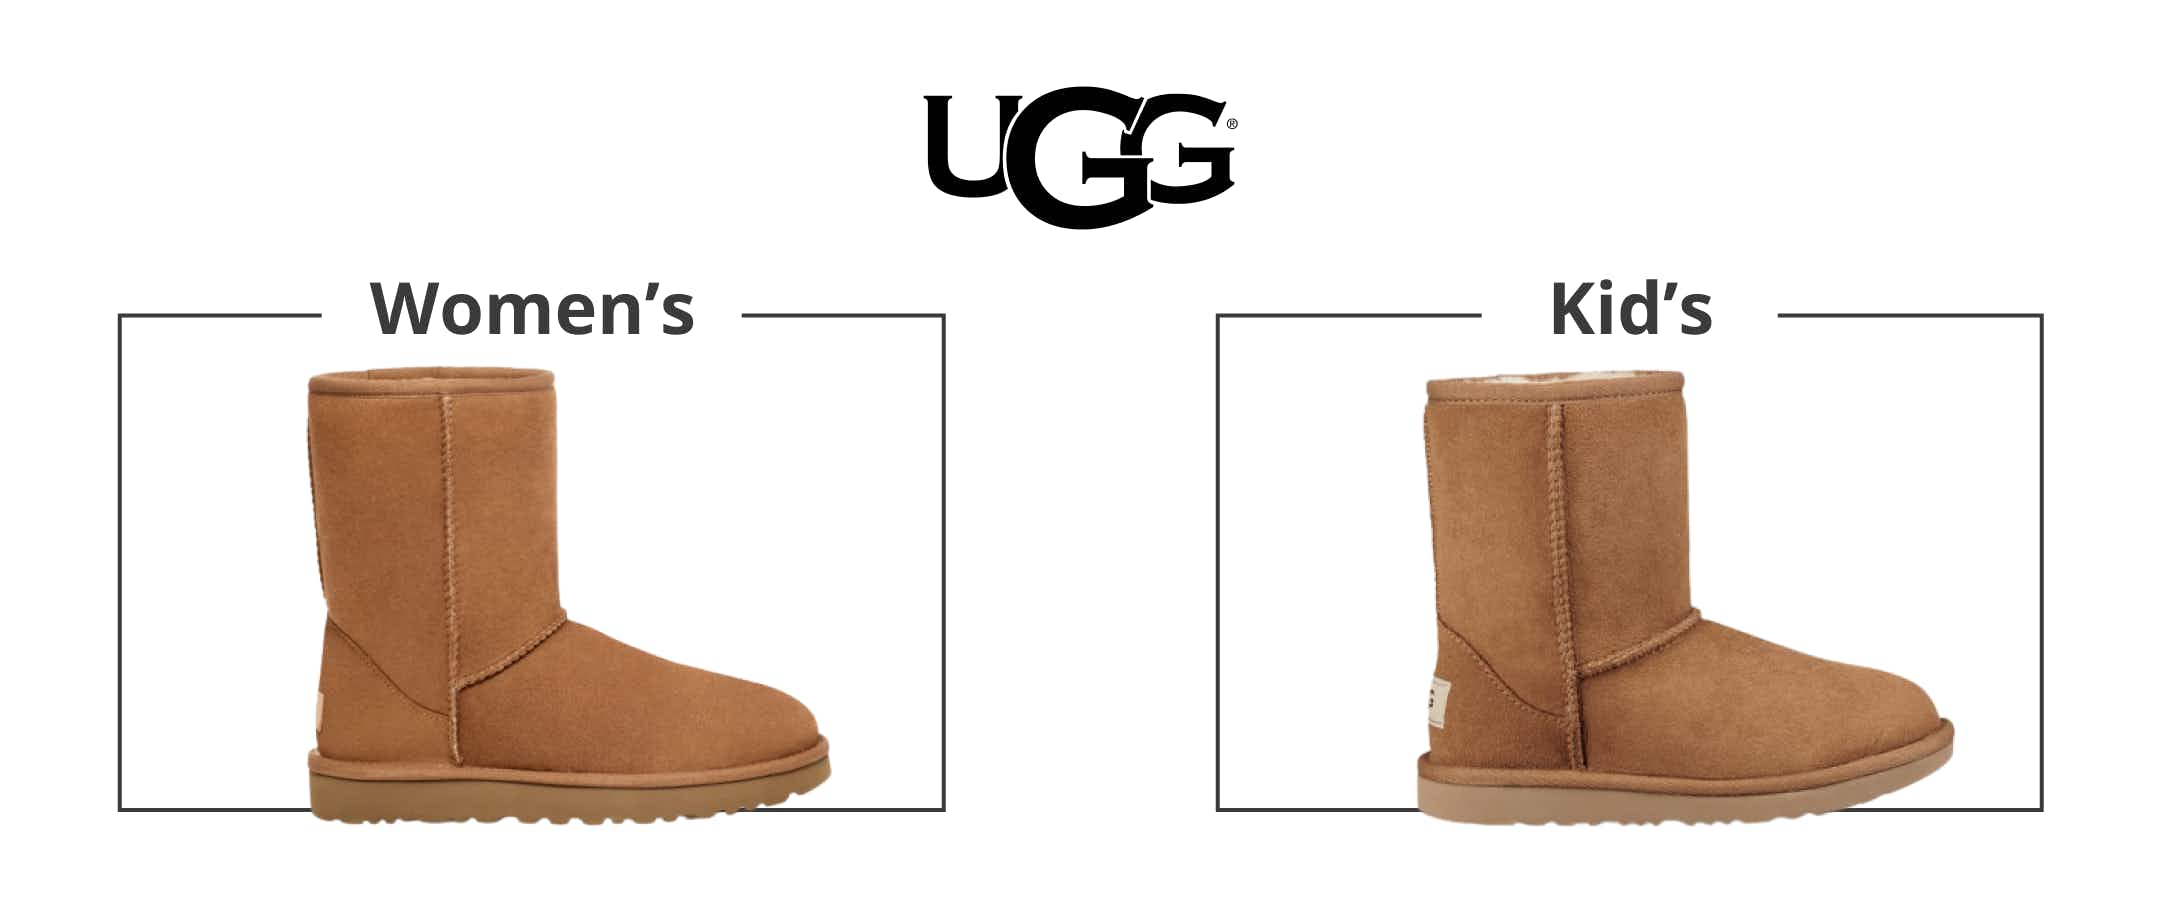 A comparison of a kid's and women's Ugg shoe